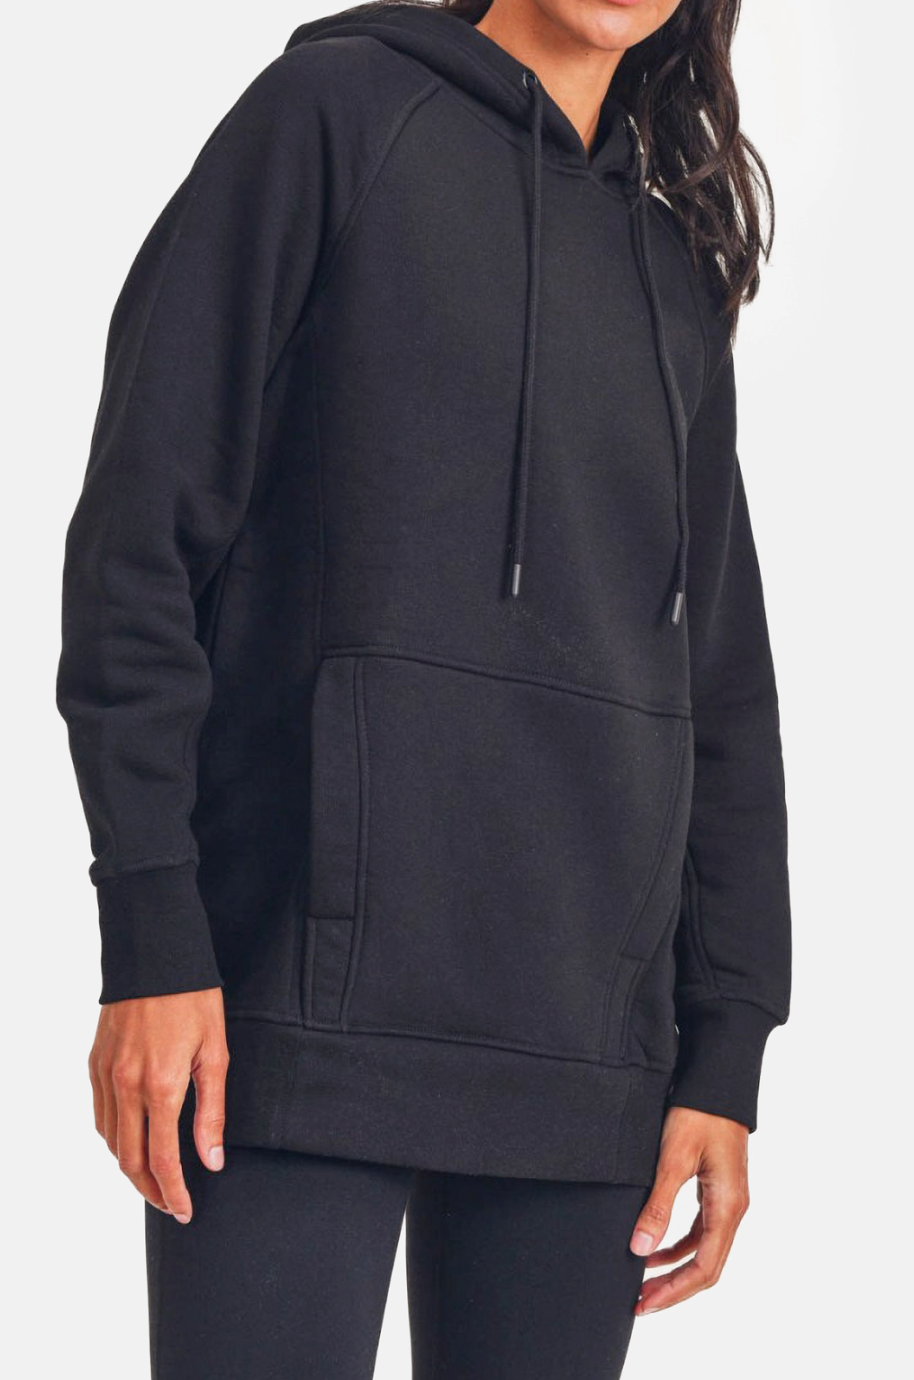 Oversized Hoodie Pullover in Black - The Street Boutique 